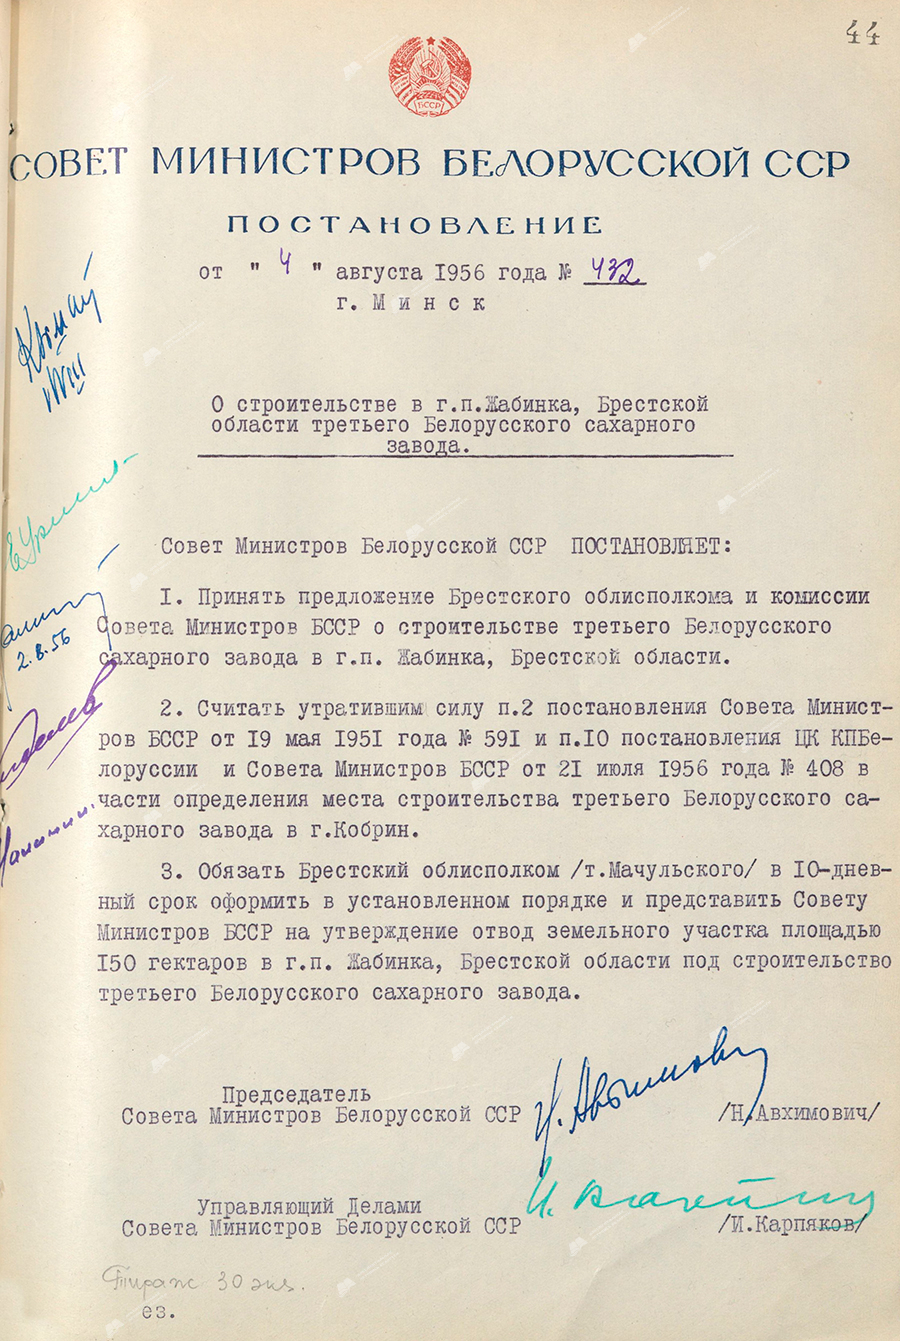 Resolution No. 432 of the Council of Ministers of the Byelorussian SSR «On construction in the urban settlement. Zhabinka, Brest region of the third Belarusian sugar factory»-стр. 0